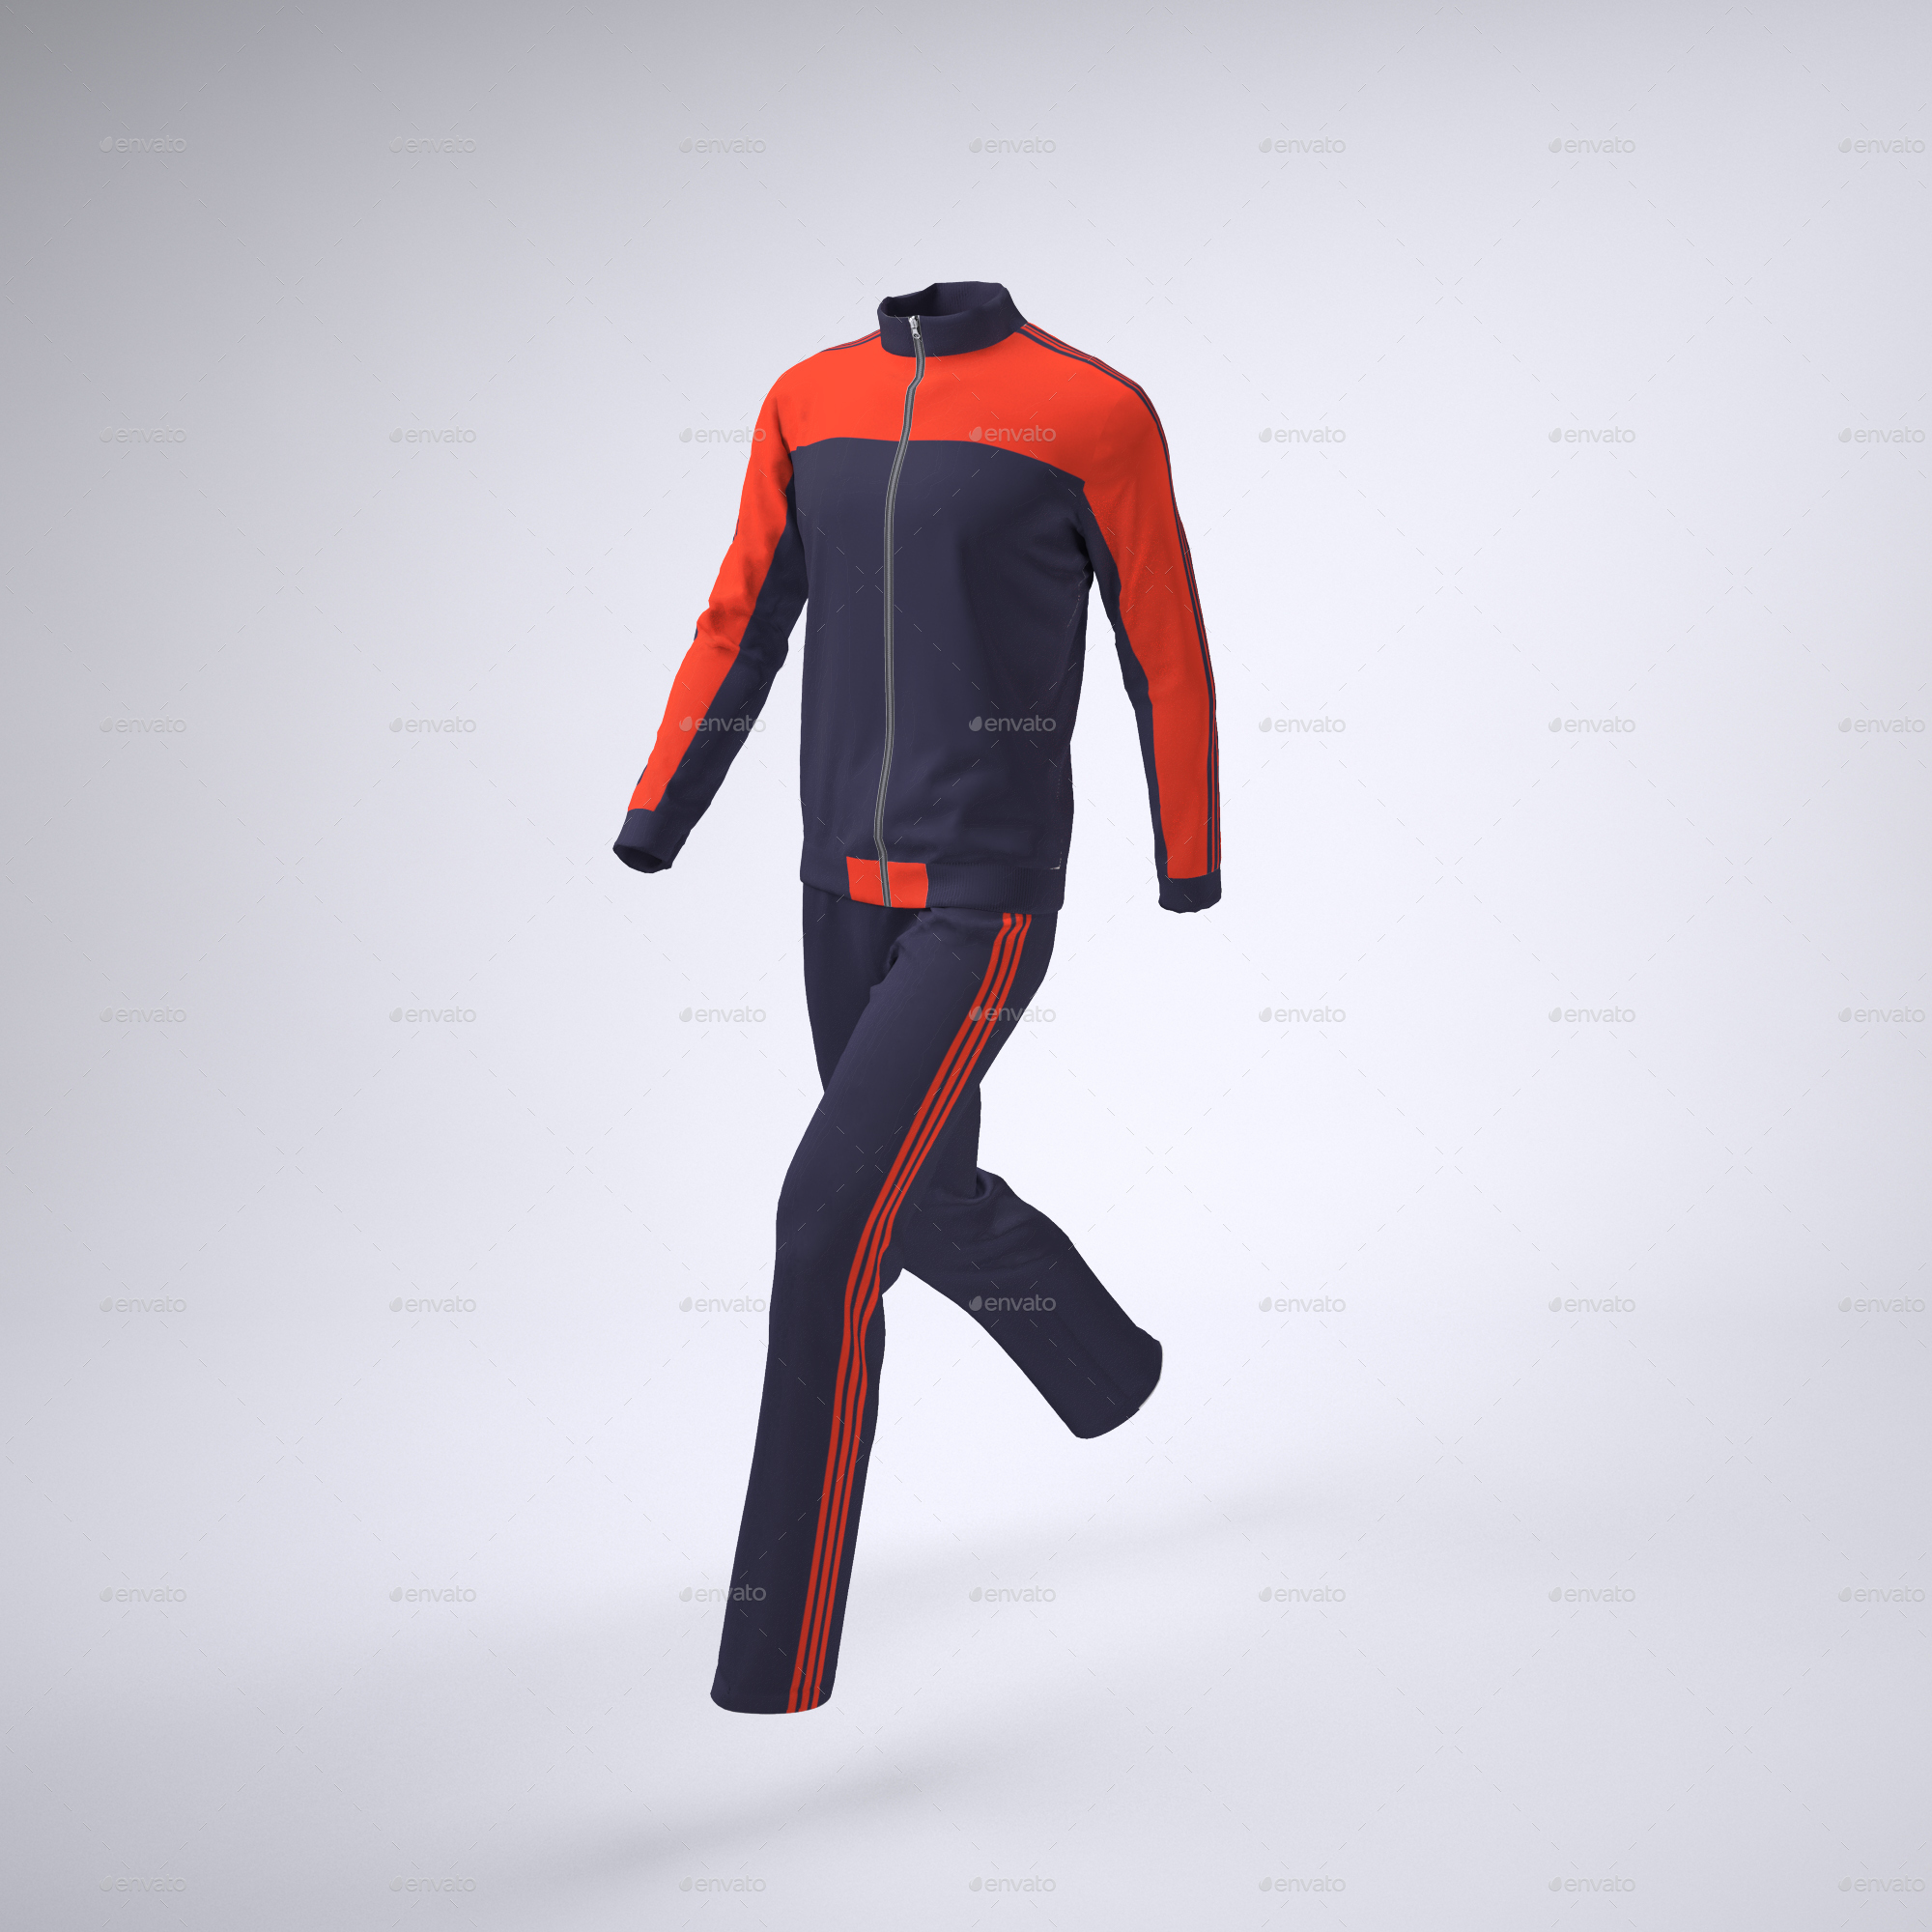 Download Tracksuit Jacket and Bottoms Mock-up by Sanchi477 | GraphicRiver